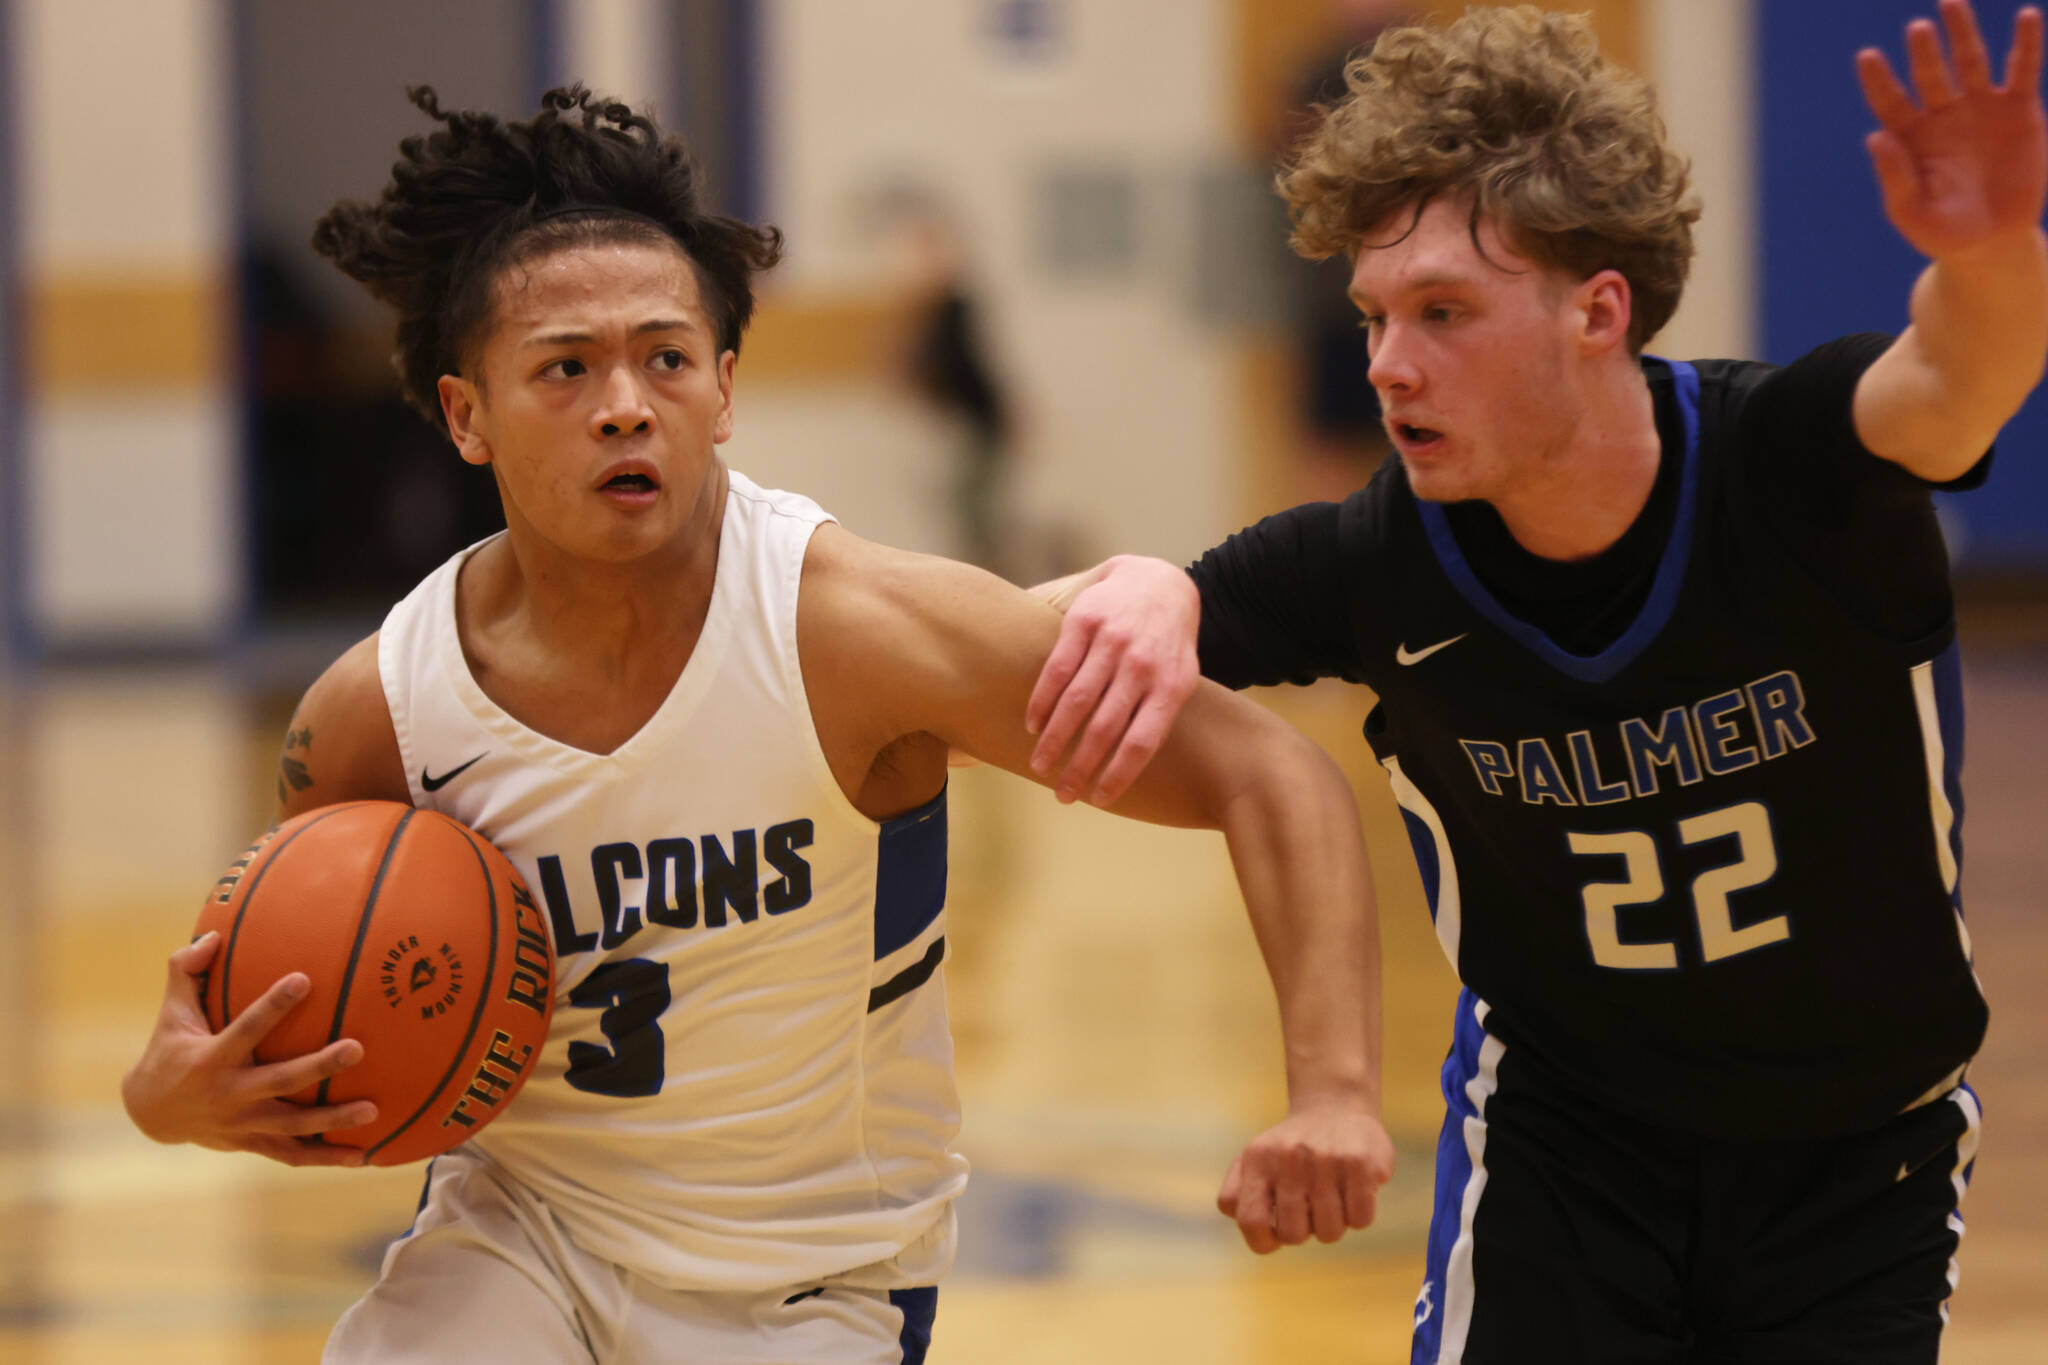 TMHS junior Lance Nierra (3) races toward the hoop while defended by Palmer senior Chad Landon (22). Nierra finished the game with 6 points. (Ben Hohenstatt / Juneau Empire)